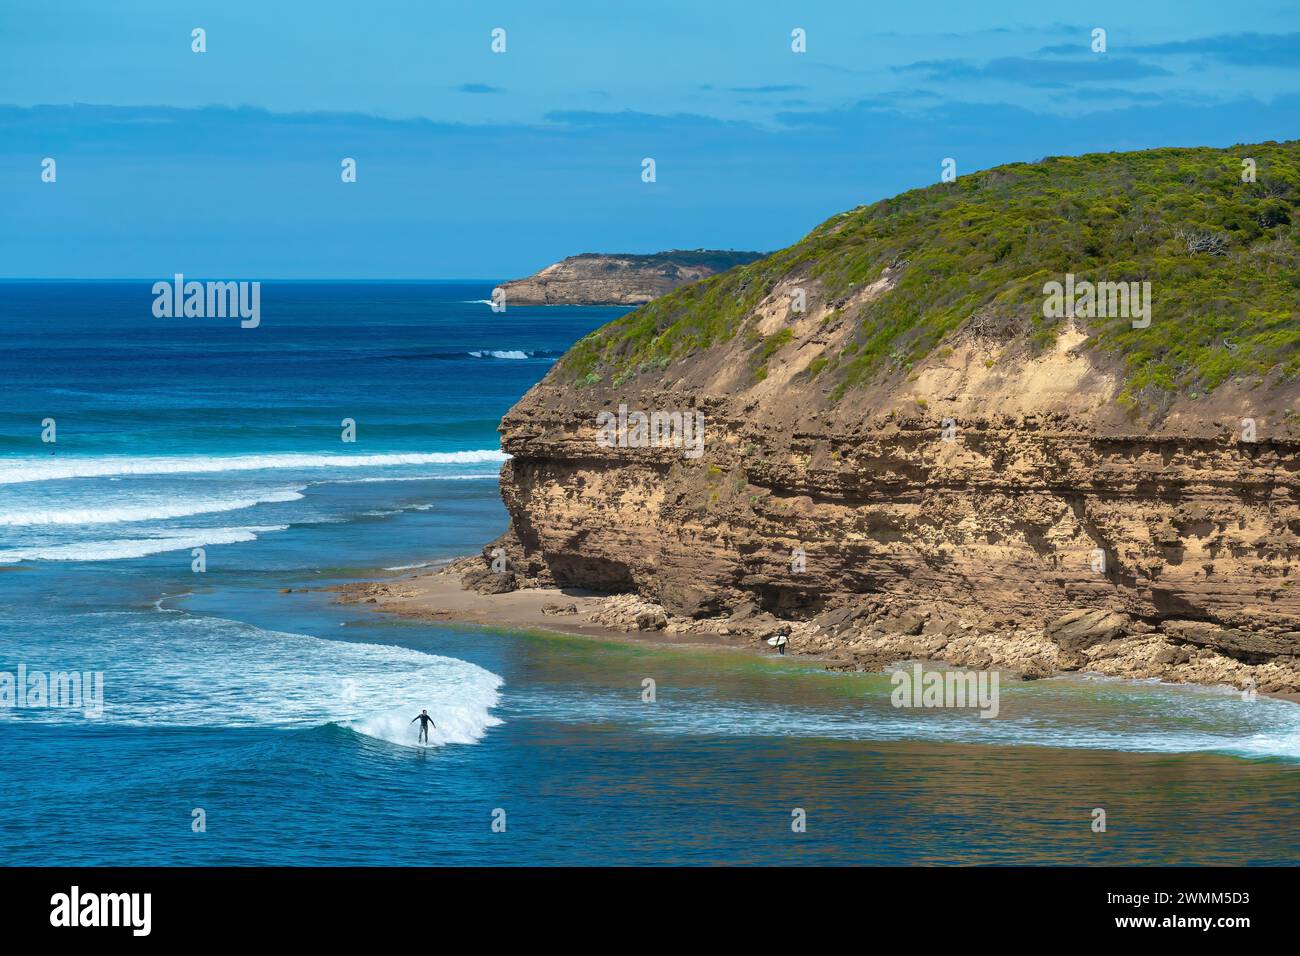 Surfers and the rugged coastline of Bells Beach in Victoria, Australia, seen from Winkipop on the Great Ocean Road. Stock Photo